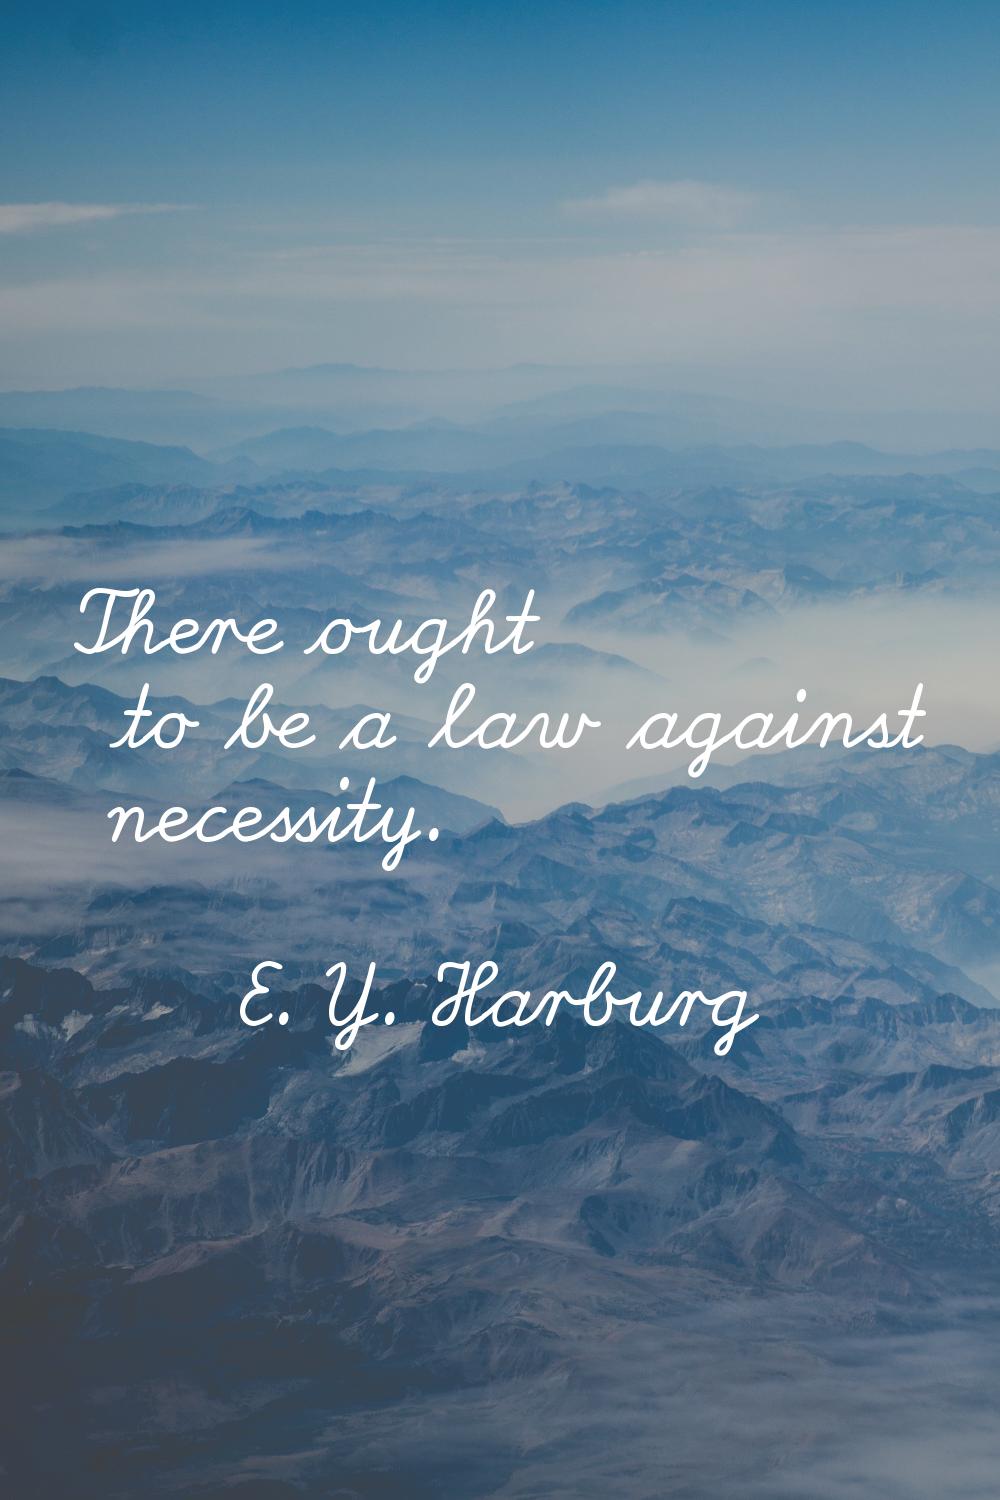 There ought to be a law against necessity.